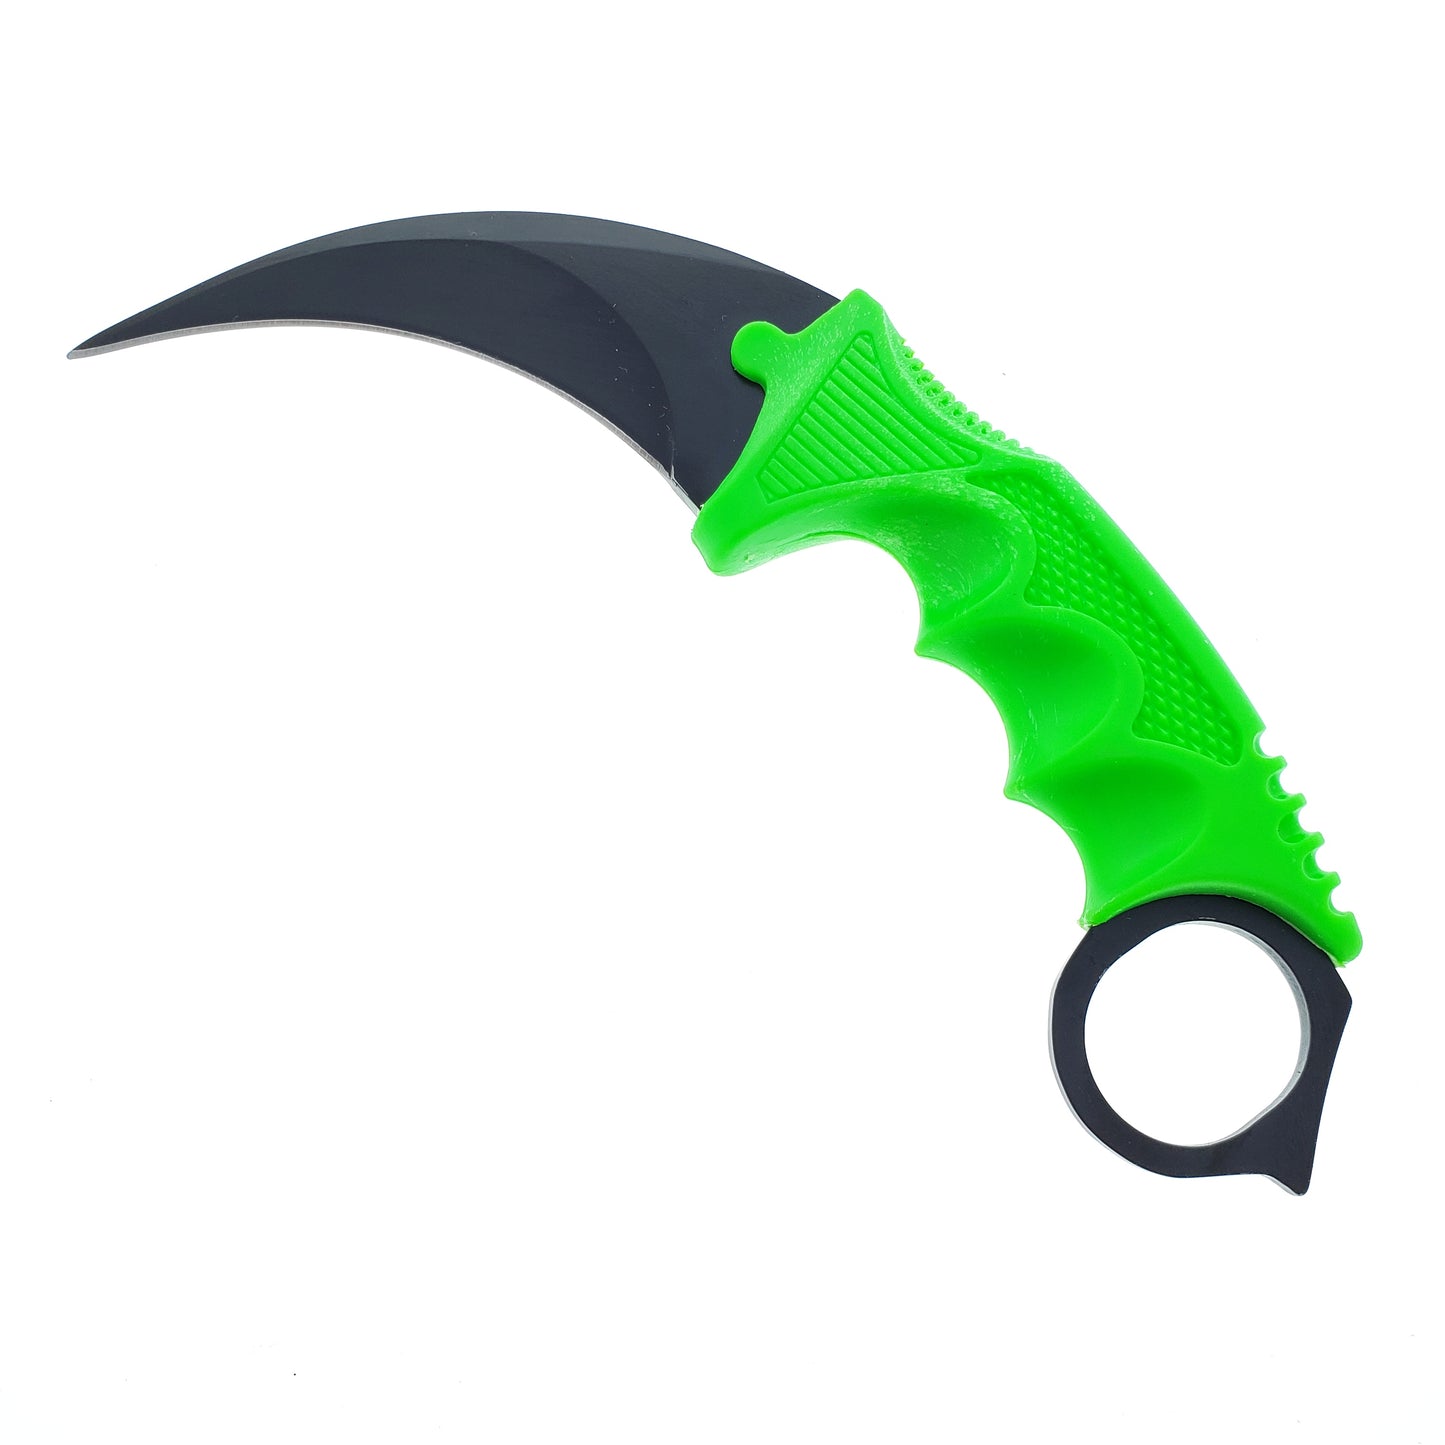 Buy Green Karambit Knife Wholesale - Pacific Solution.